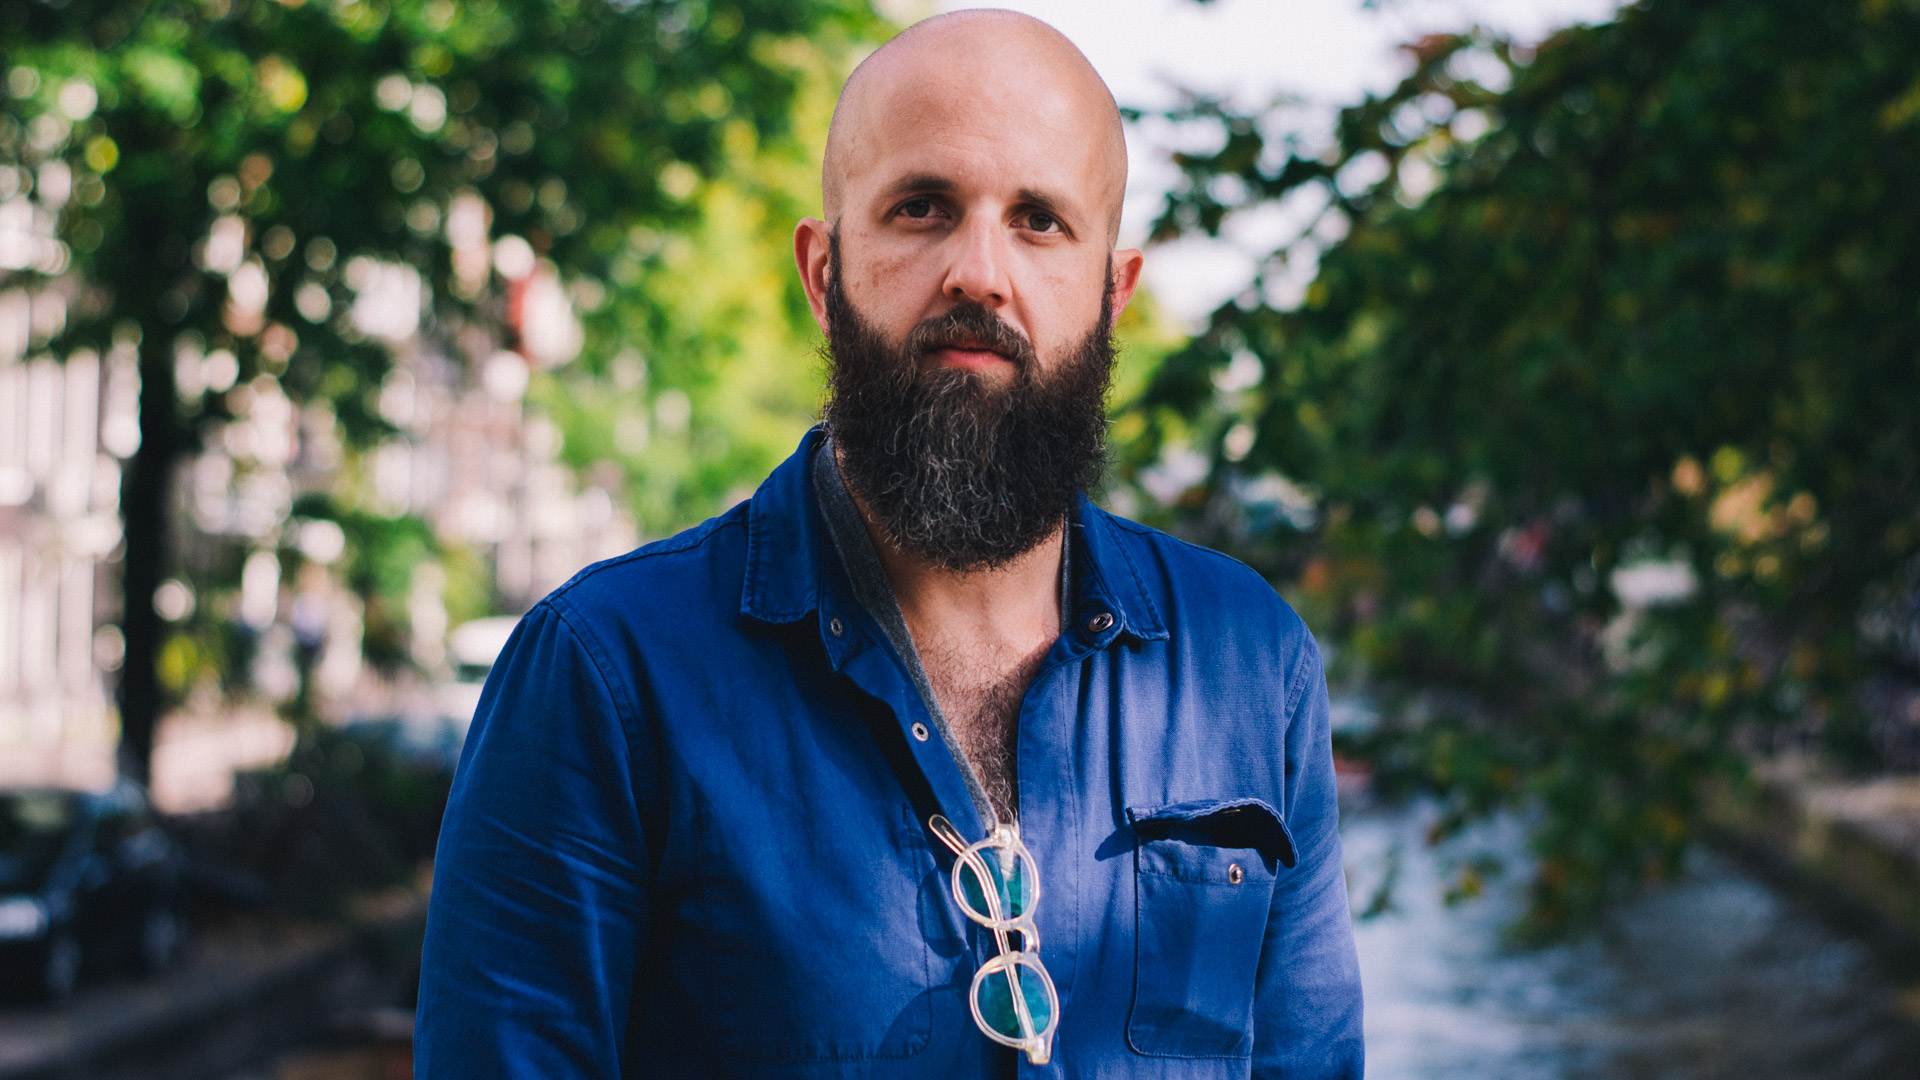 William Fitzsimmons (Photo by Matthijs van der Ven for The Influences)-0418